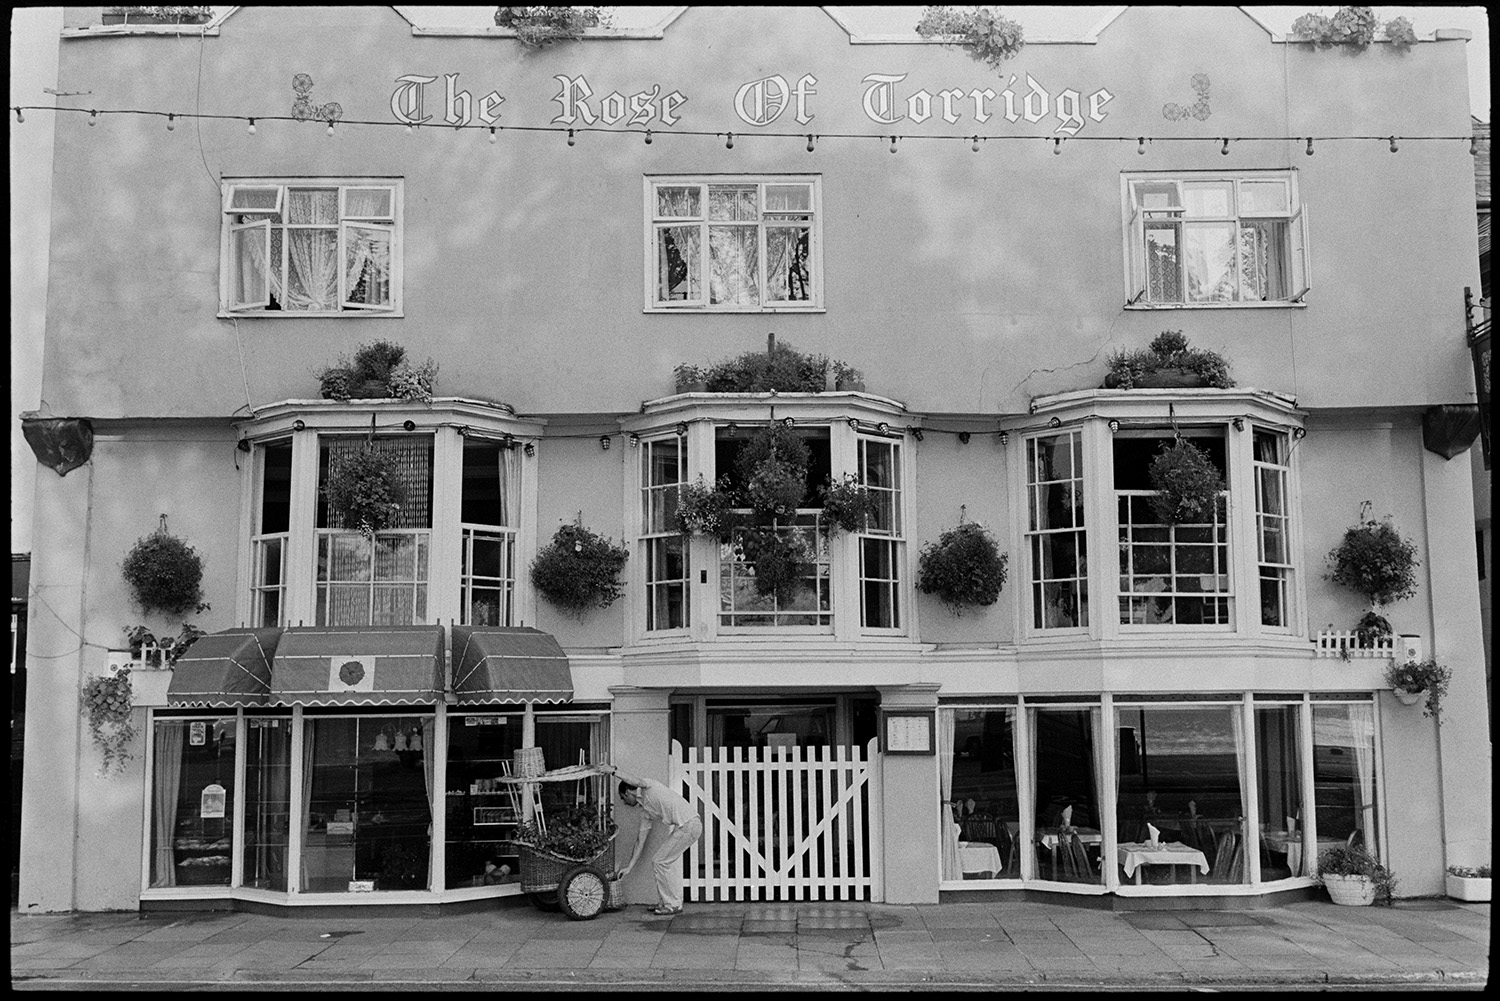 Front of Restaurant, Tea Room. 
[The shop front of The Rose of Torridge tea rooms or restaurant at Bideford Quay. A person is securing a small wagon outside with plants and the windows are decorated with hanging baskets.]